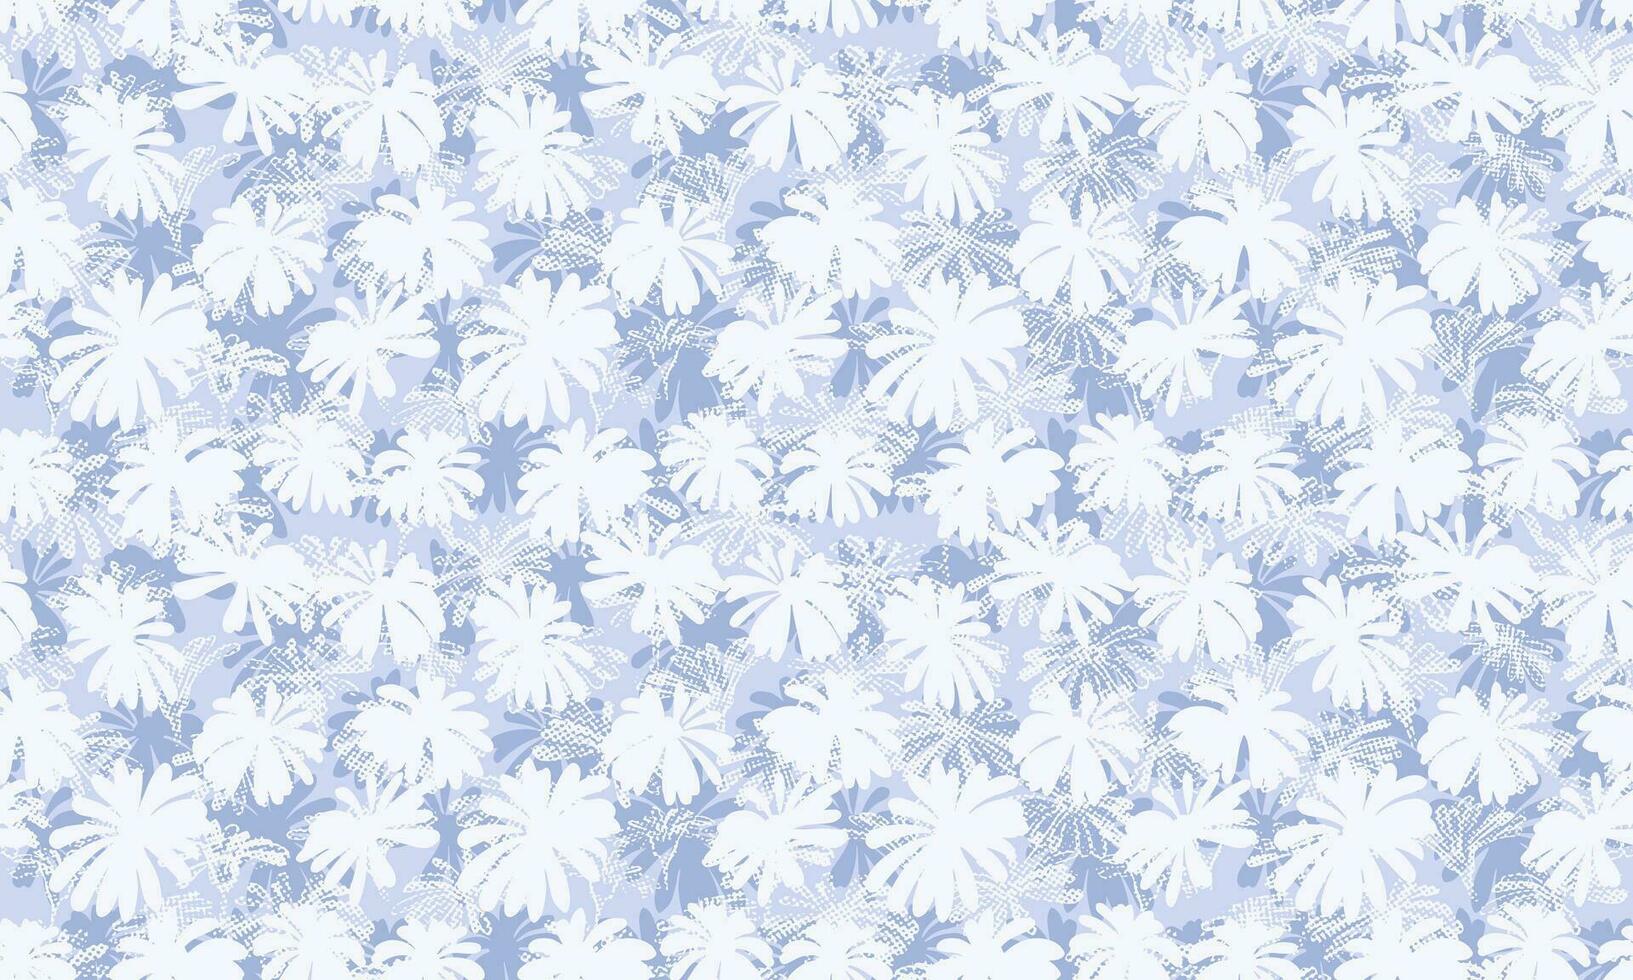 Seamless pattern with vector hand drawn silhouette flowers. White shape abstract textures flowers on a blue background. Template for textile, surface design, fabric, wallpaper, fashion